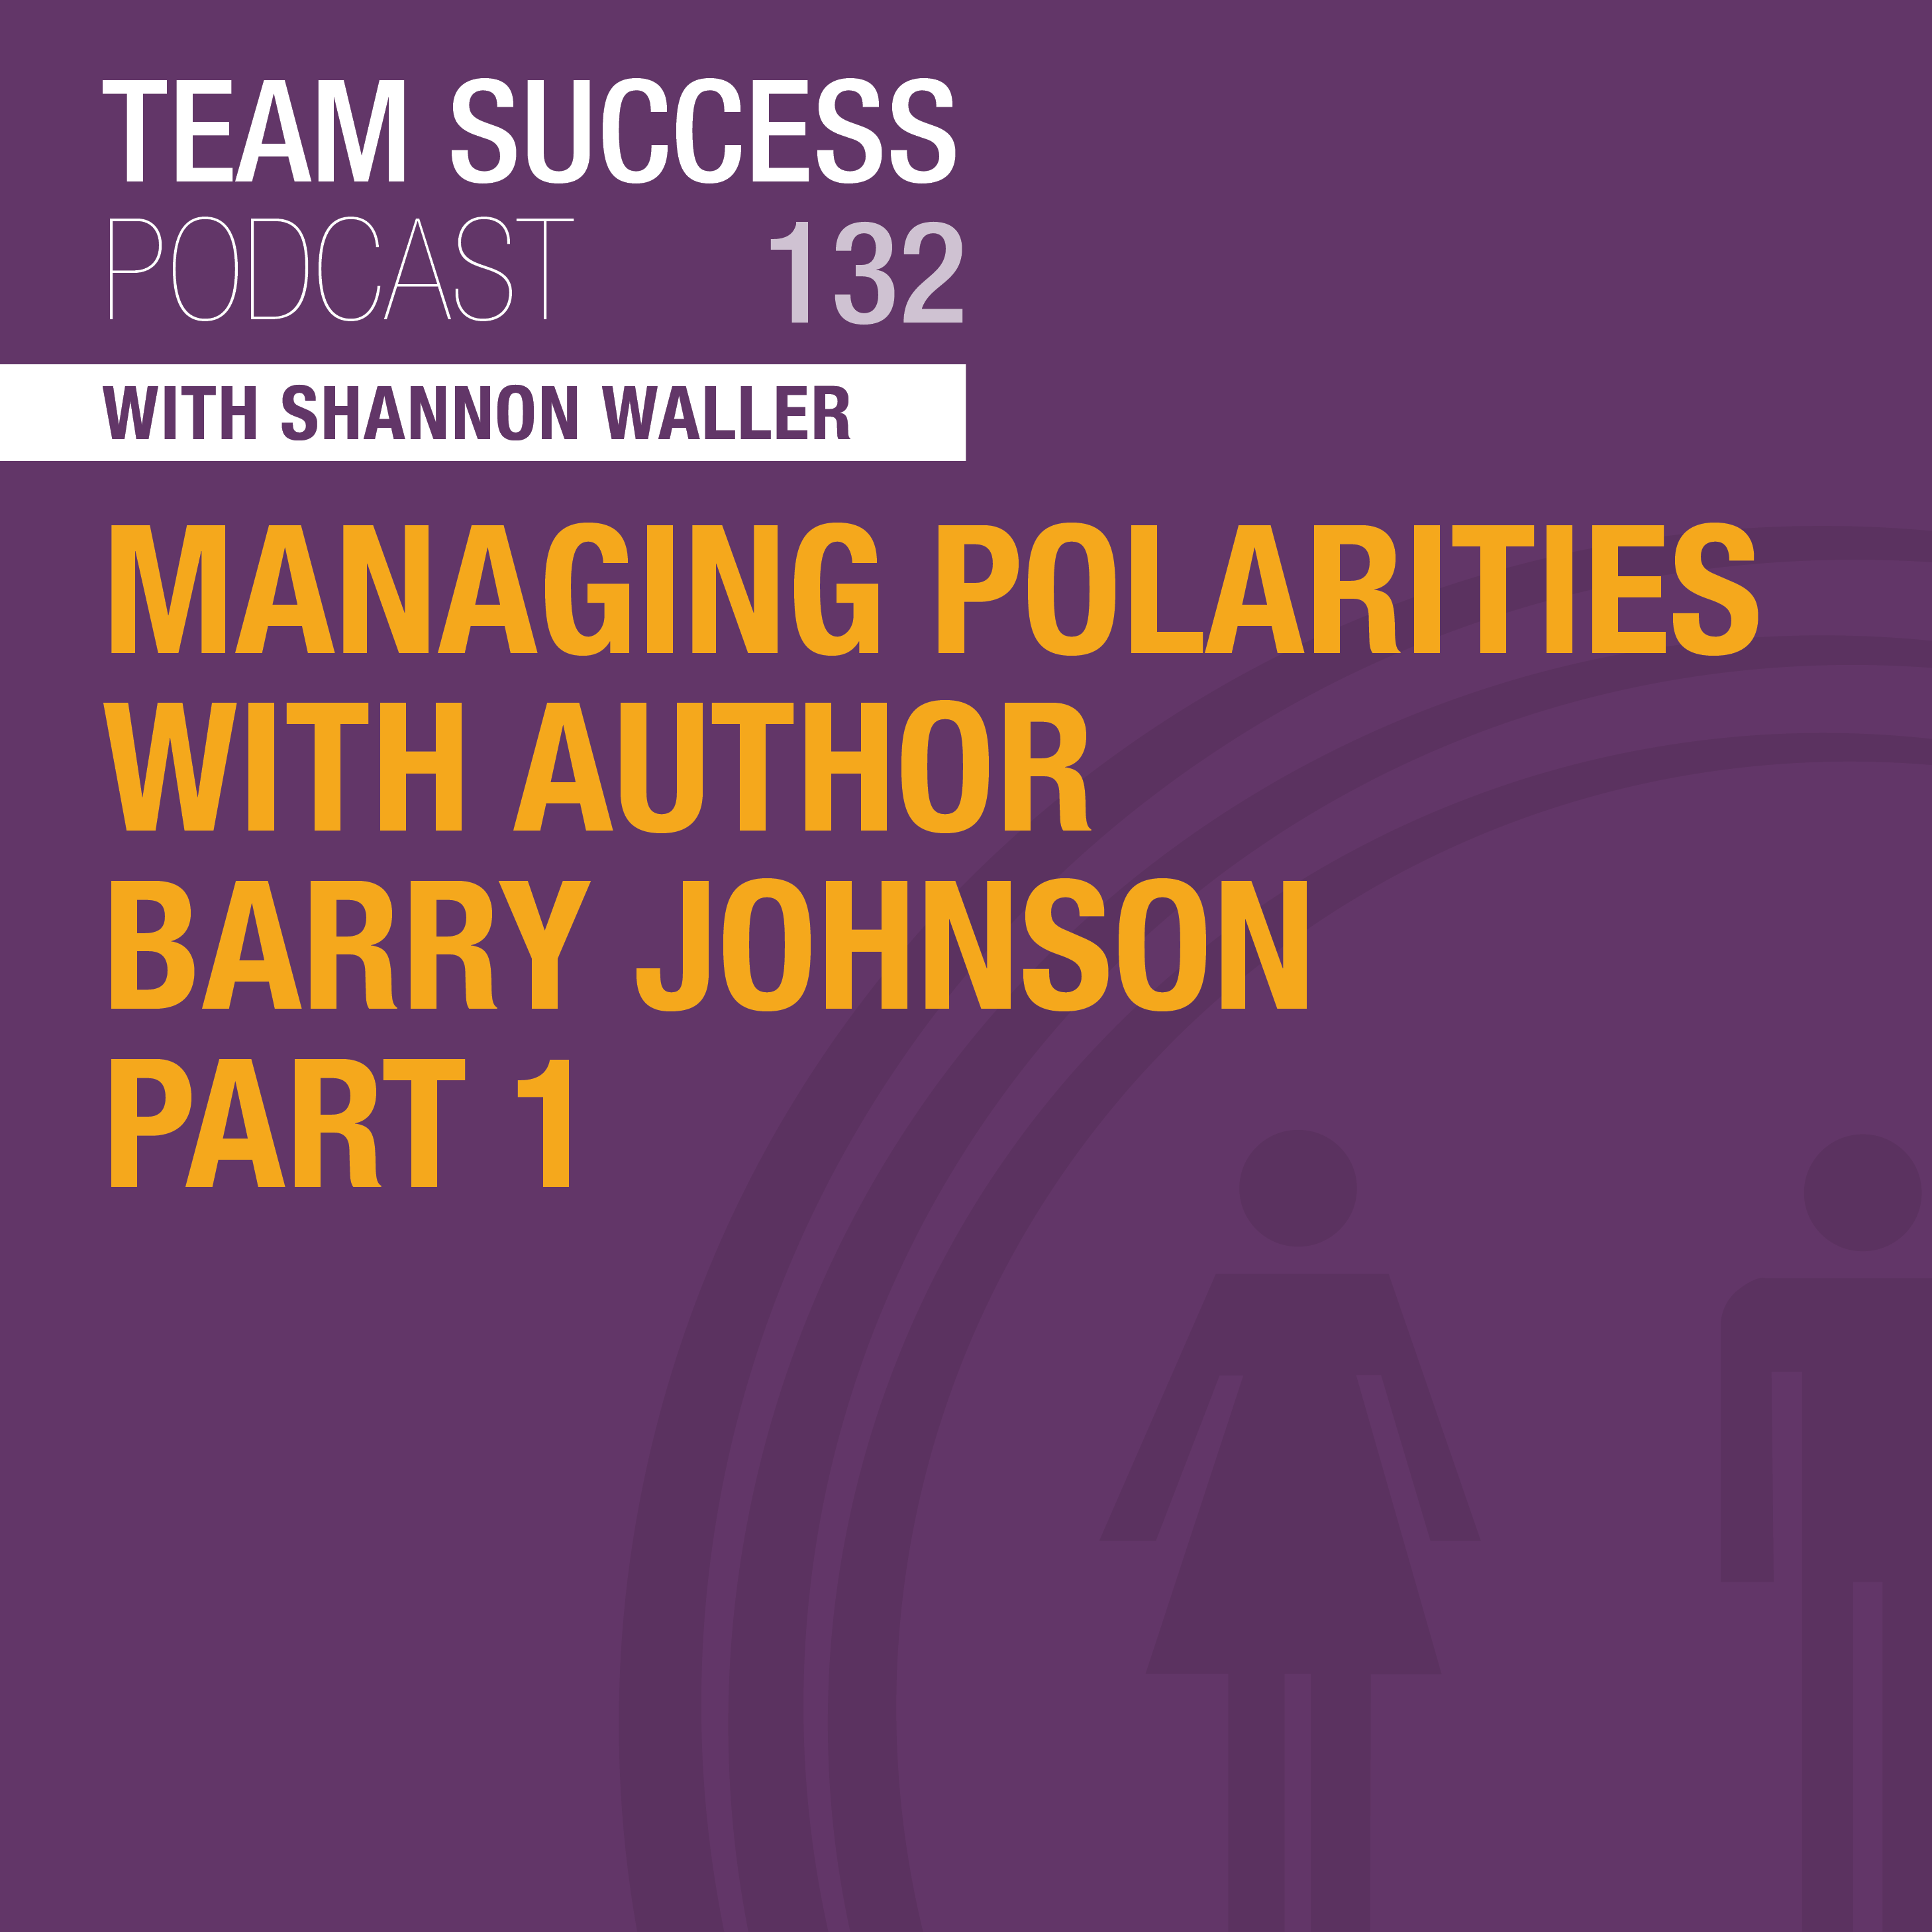 Managing Polarities Part 1 With Author Barry Johnson